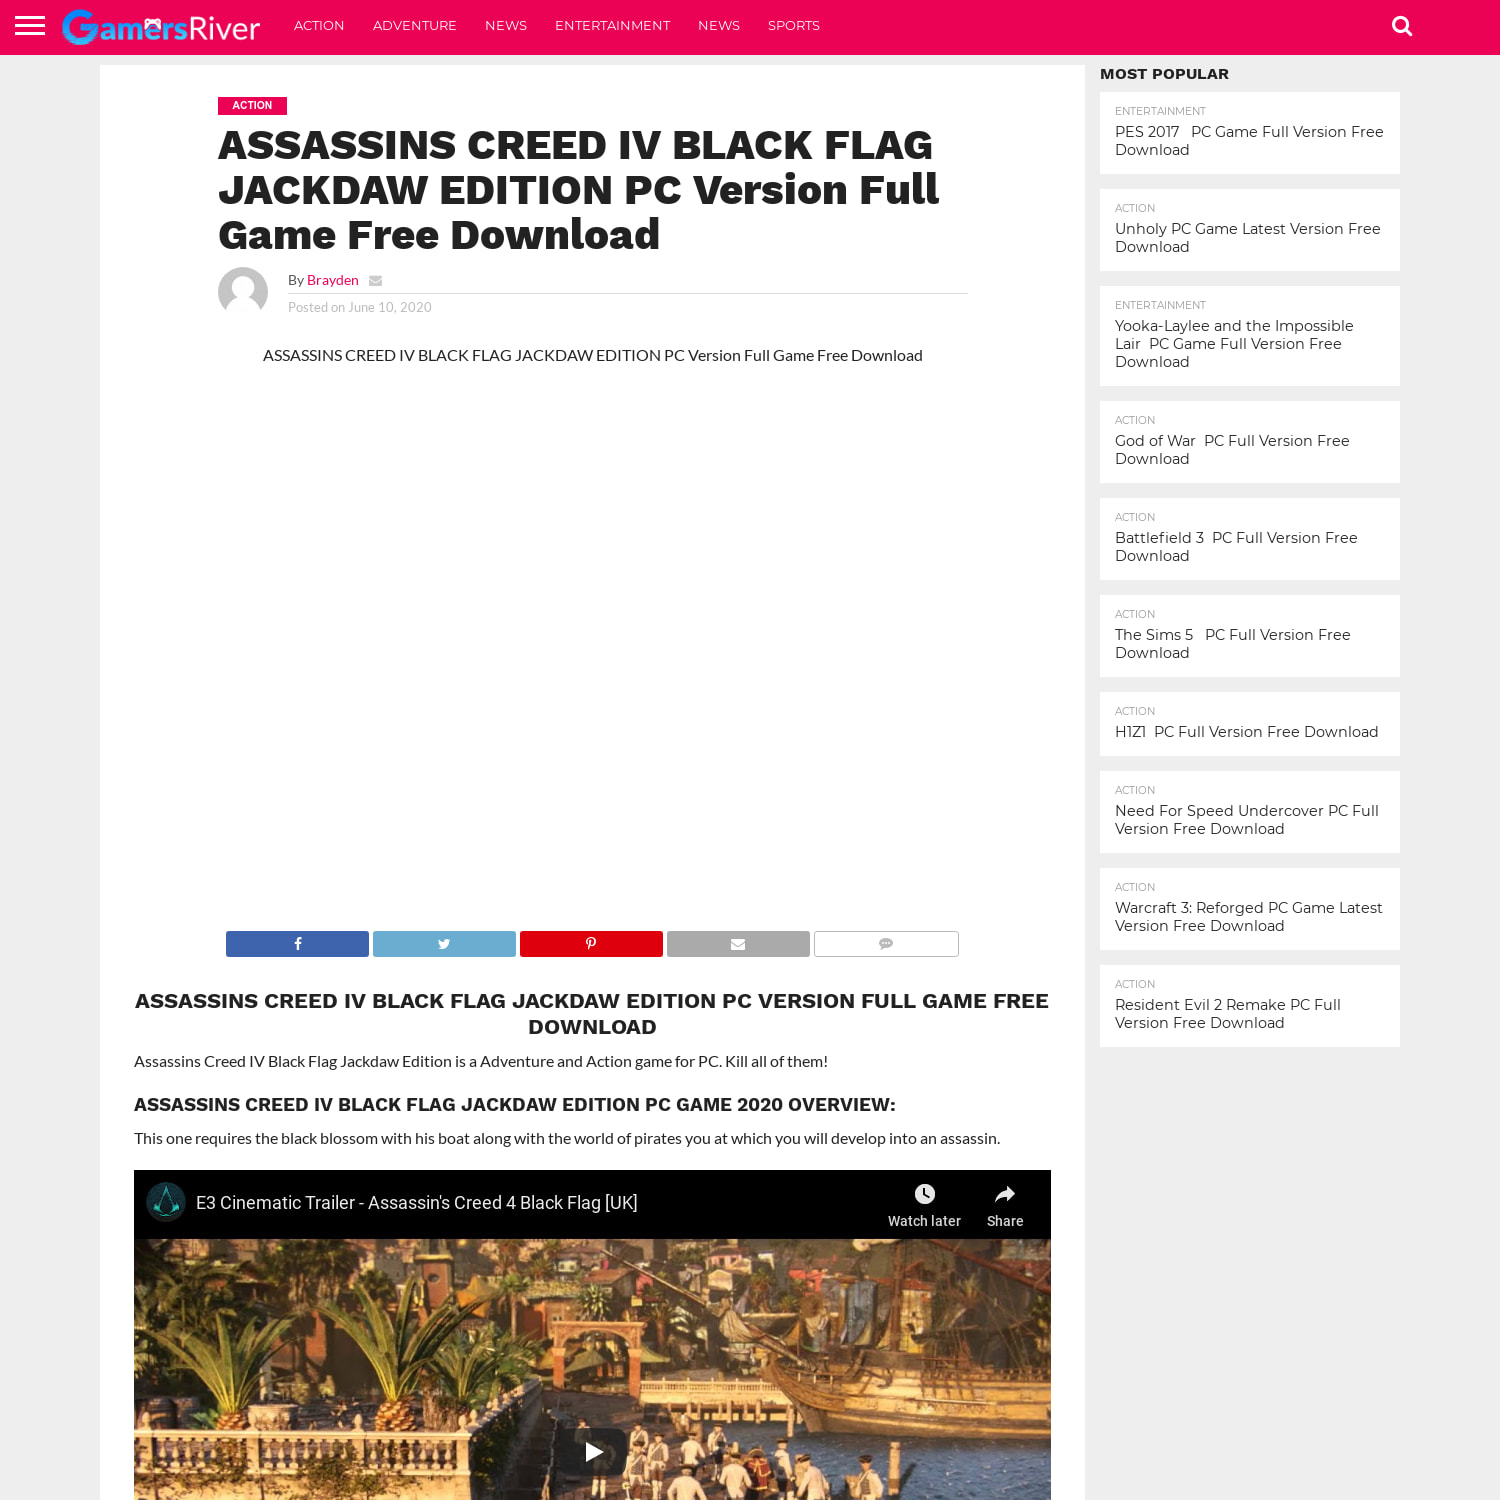 ASSASSINS CREED IV BLACK FLAG JACKDAW EDITION PC Version Full Game Free Download